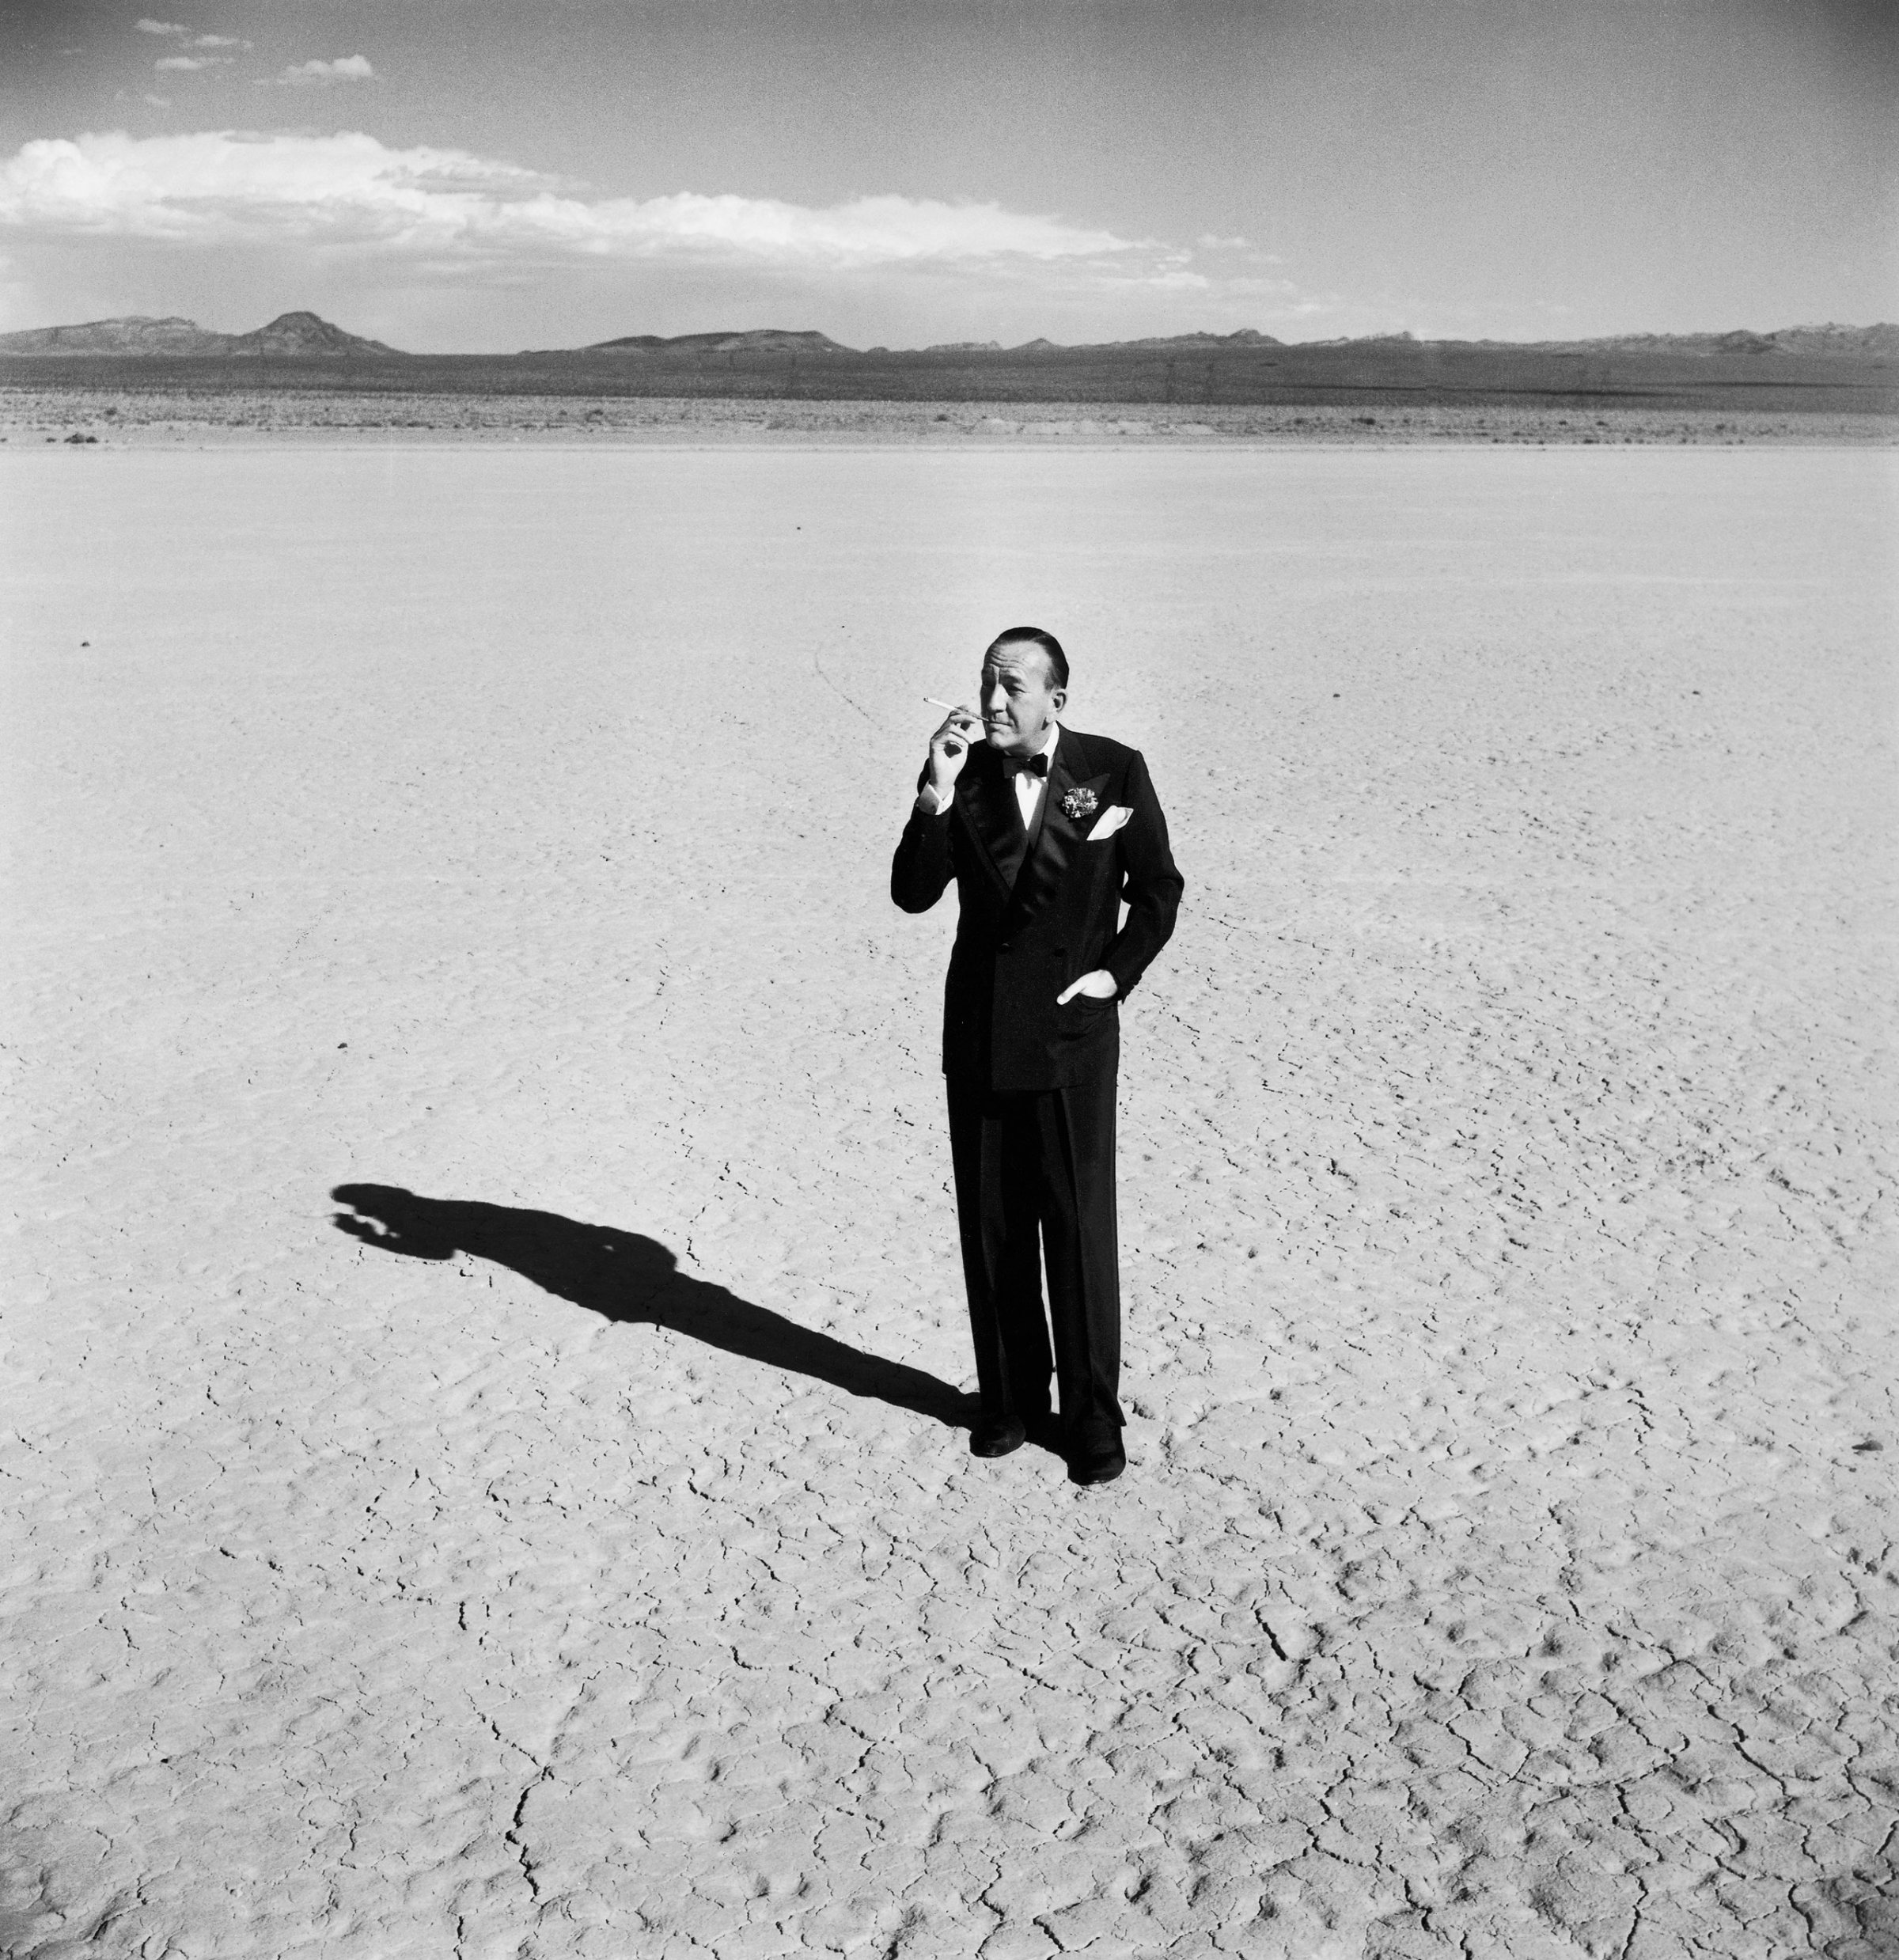 Noël Coward standing in a dry lake bed, Nevada, 1955.